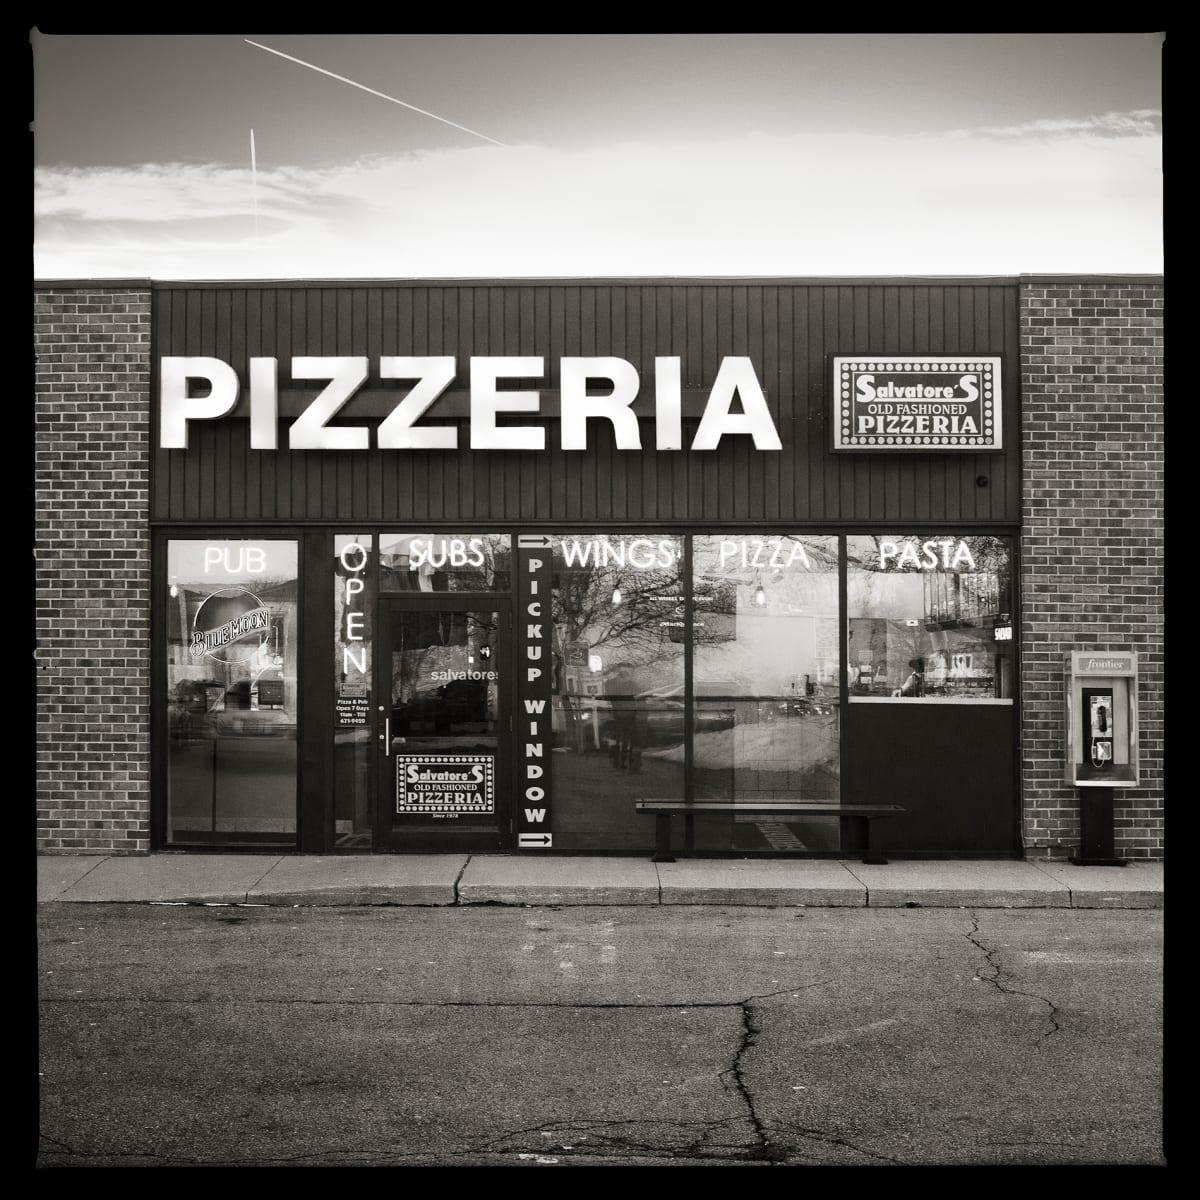 585.671.9950 – Salvatore’s Pizza, 1217 Bay Road, Webster, NY 14580 by Eric T. Kunsman  Image: ID: A black and white image shows a brick building that houses a Salvatore's Pizza.  There is a glass window and door advertising the pizzeria, with a big sign that says "PIZZERIA" above the door.  To the right of the windows is a payphone.